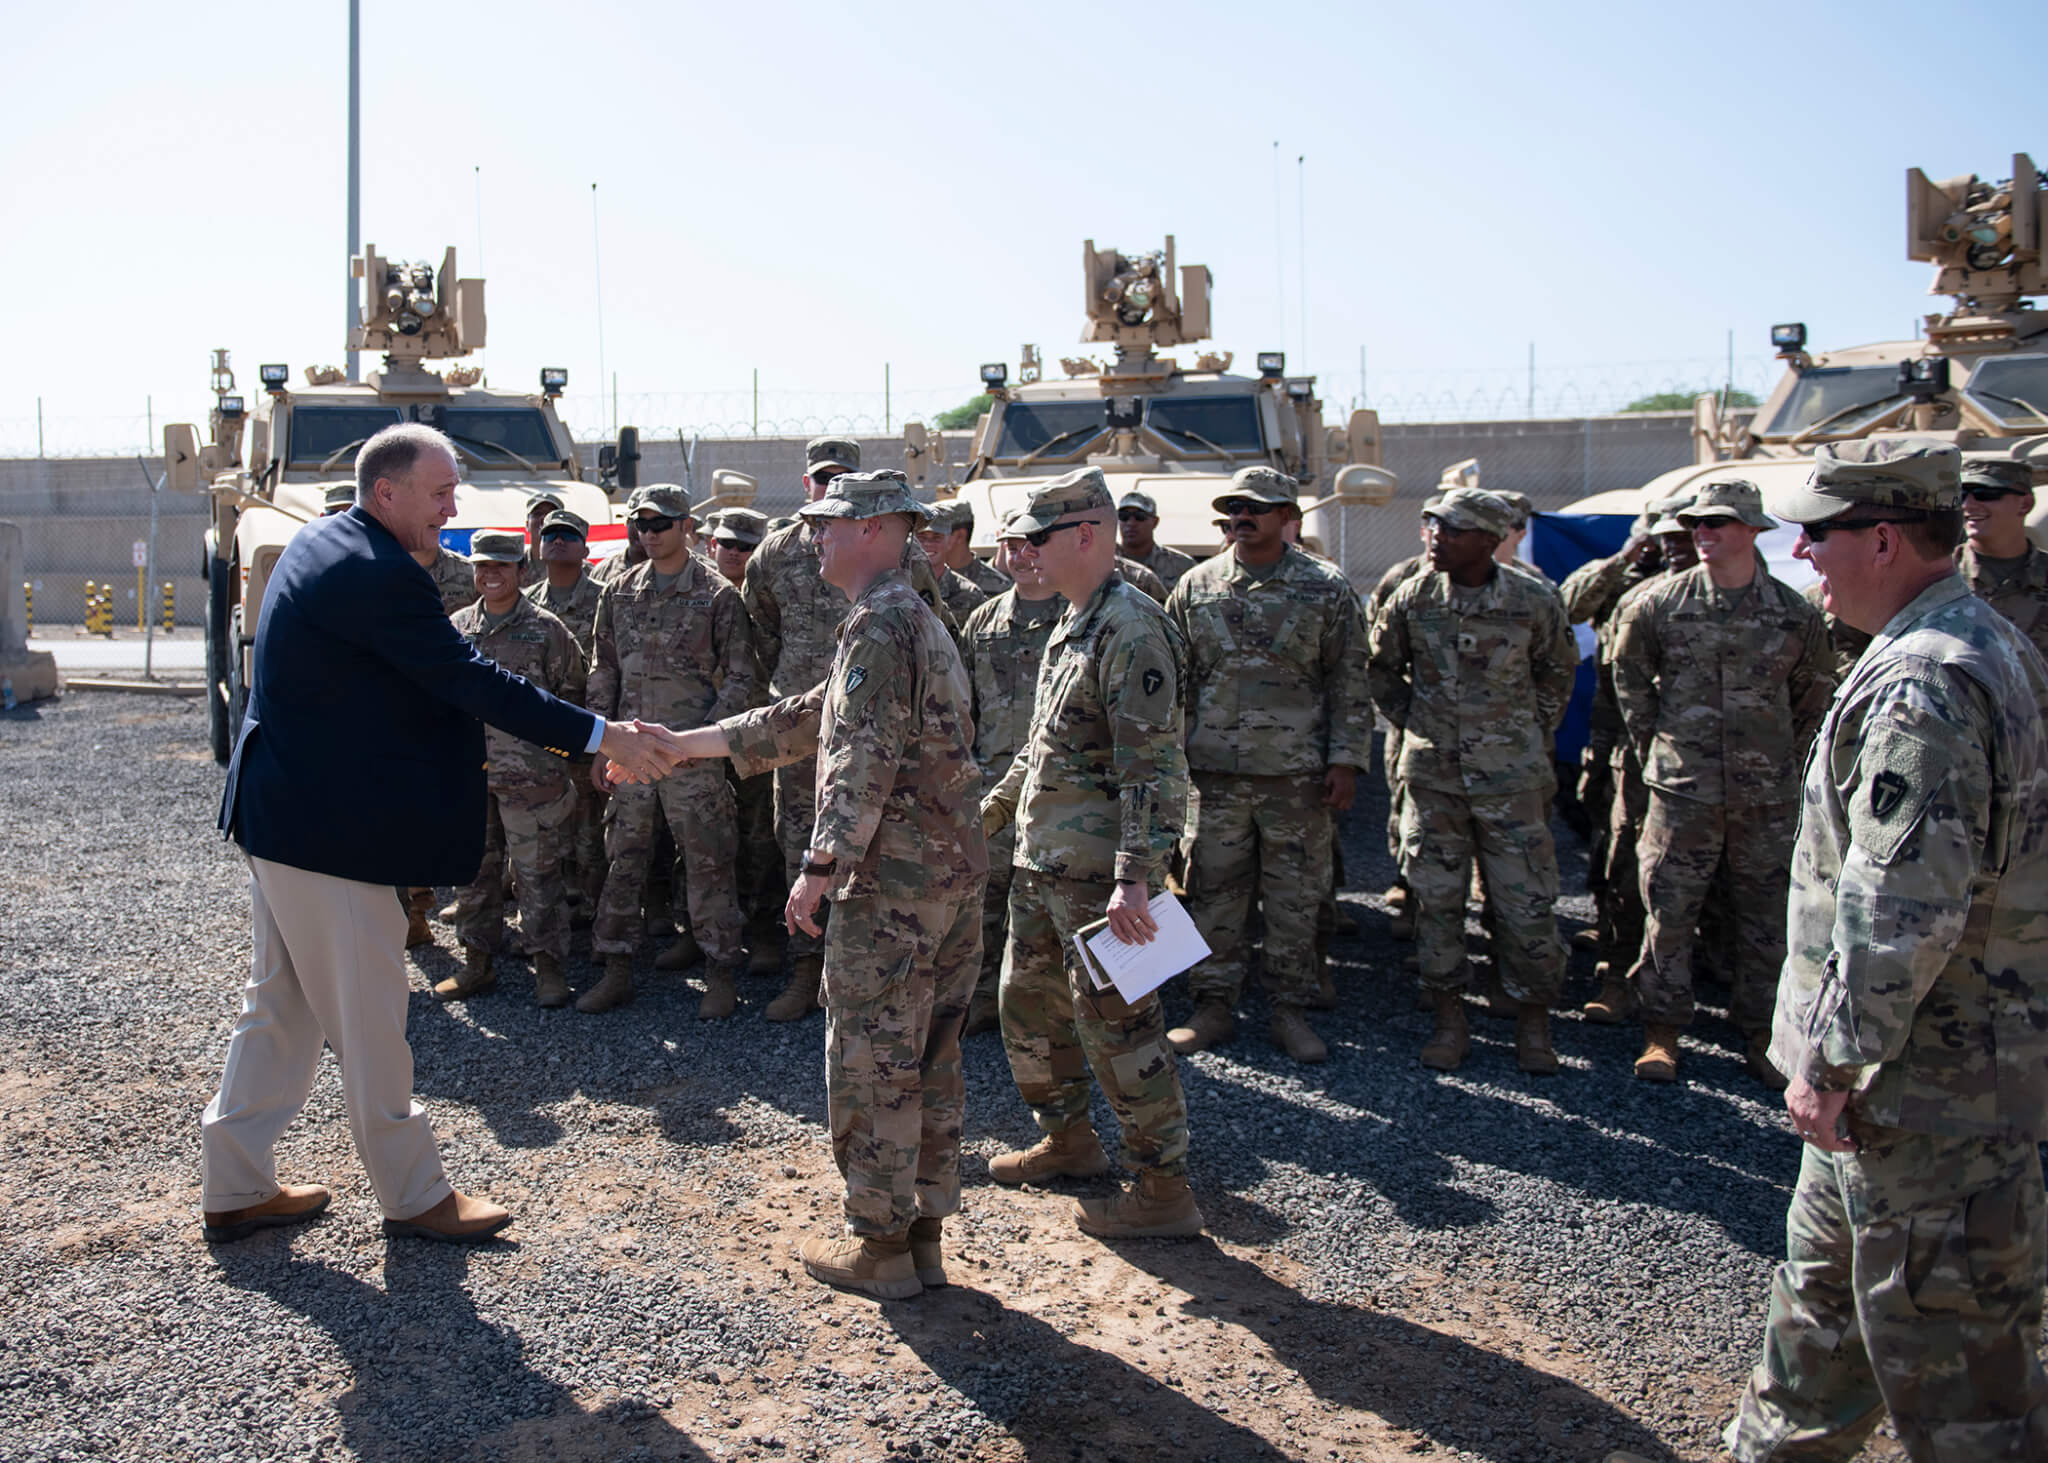 Kelly, a co-sponsor of the bill, greets Task Force Alamo of the Texas Army National Guard during a congressional delegation visit in Djibouti. Photo by Tech. Sgt. Shawn Nickel)